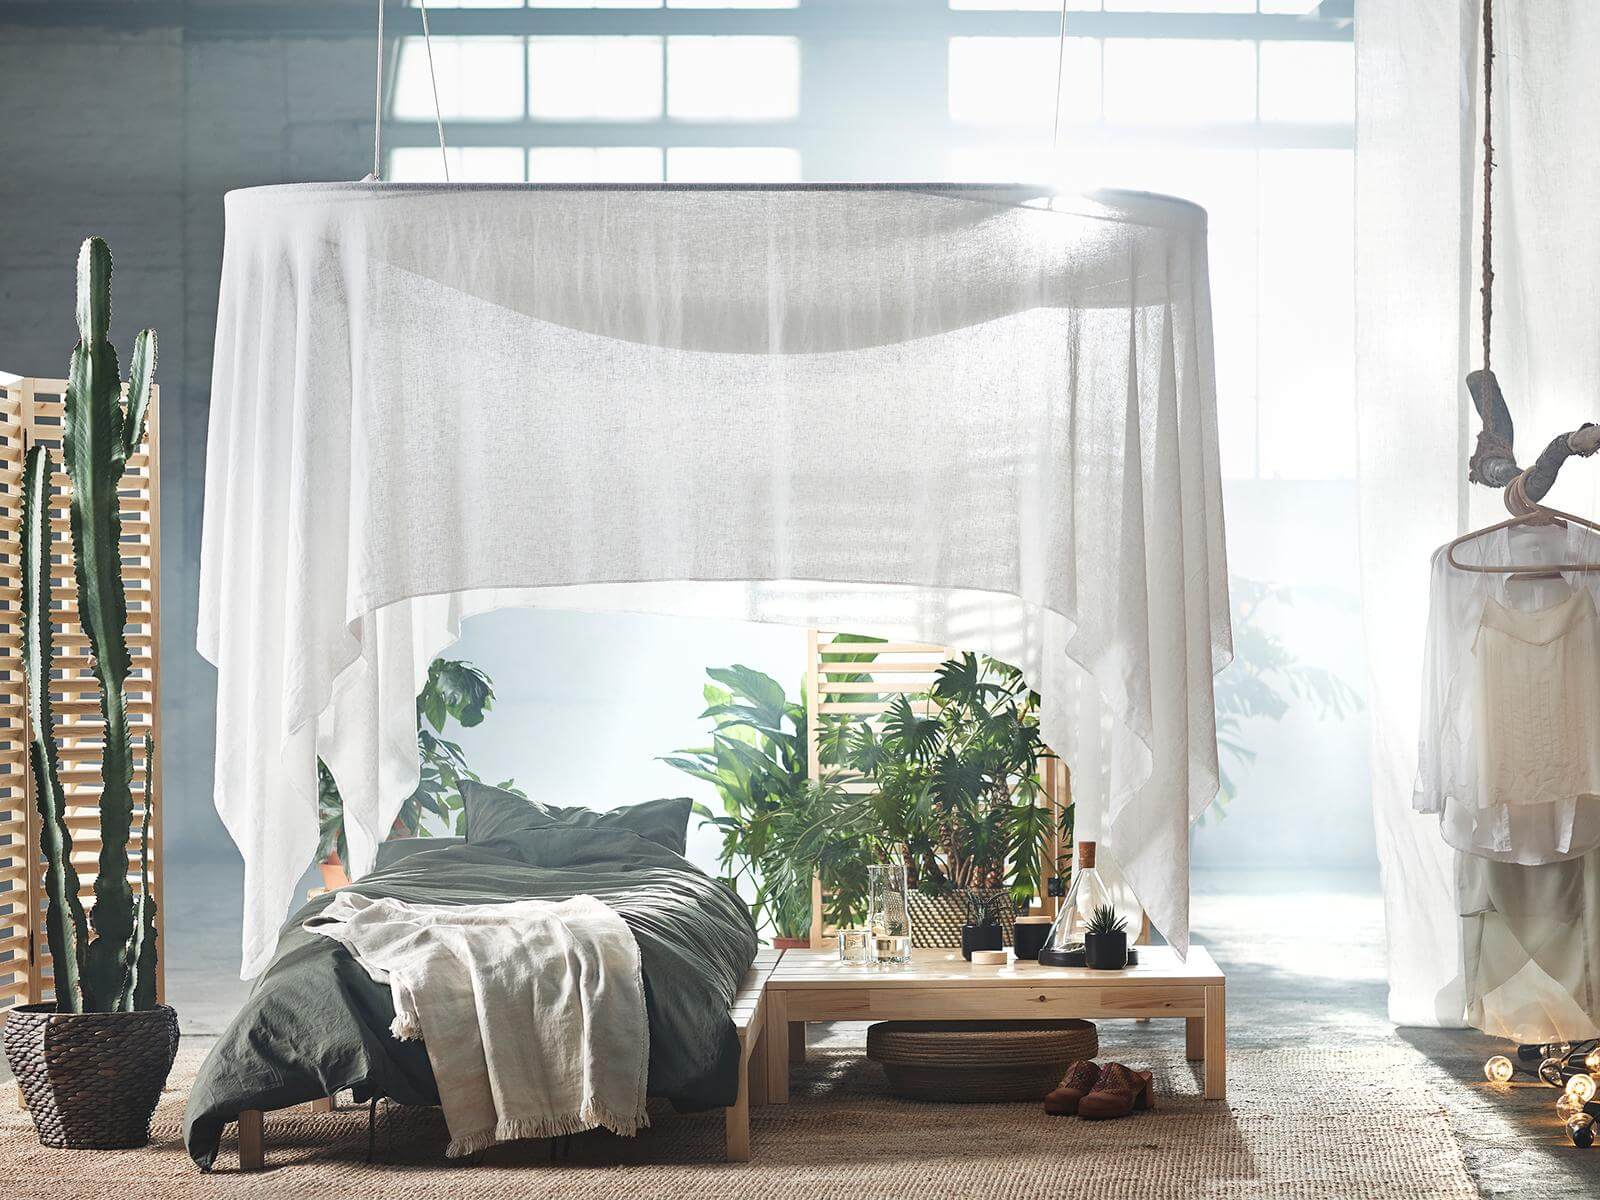 Check Out IKEA’s New Wellness-Inspired Collection